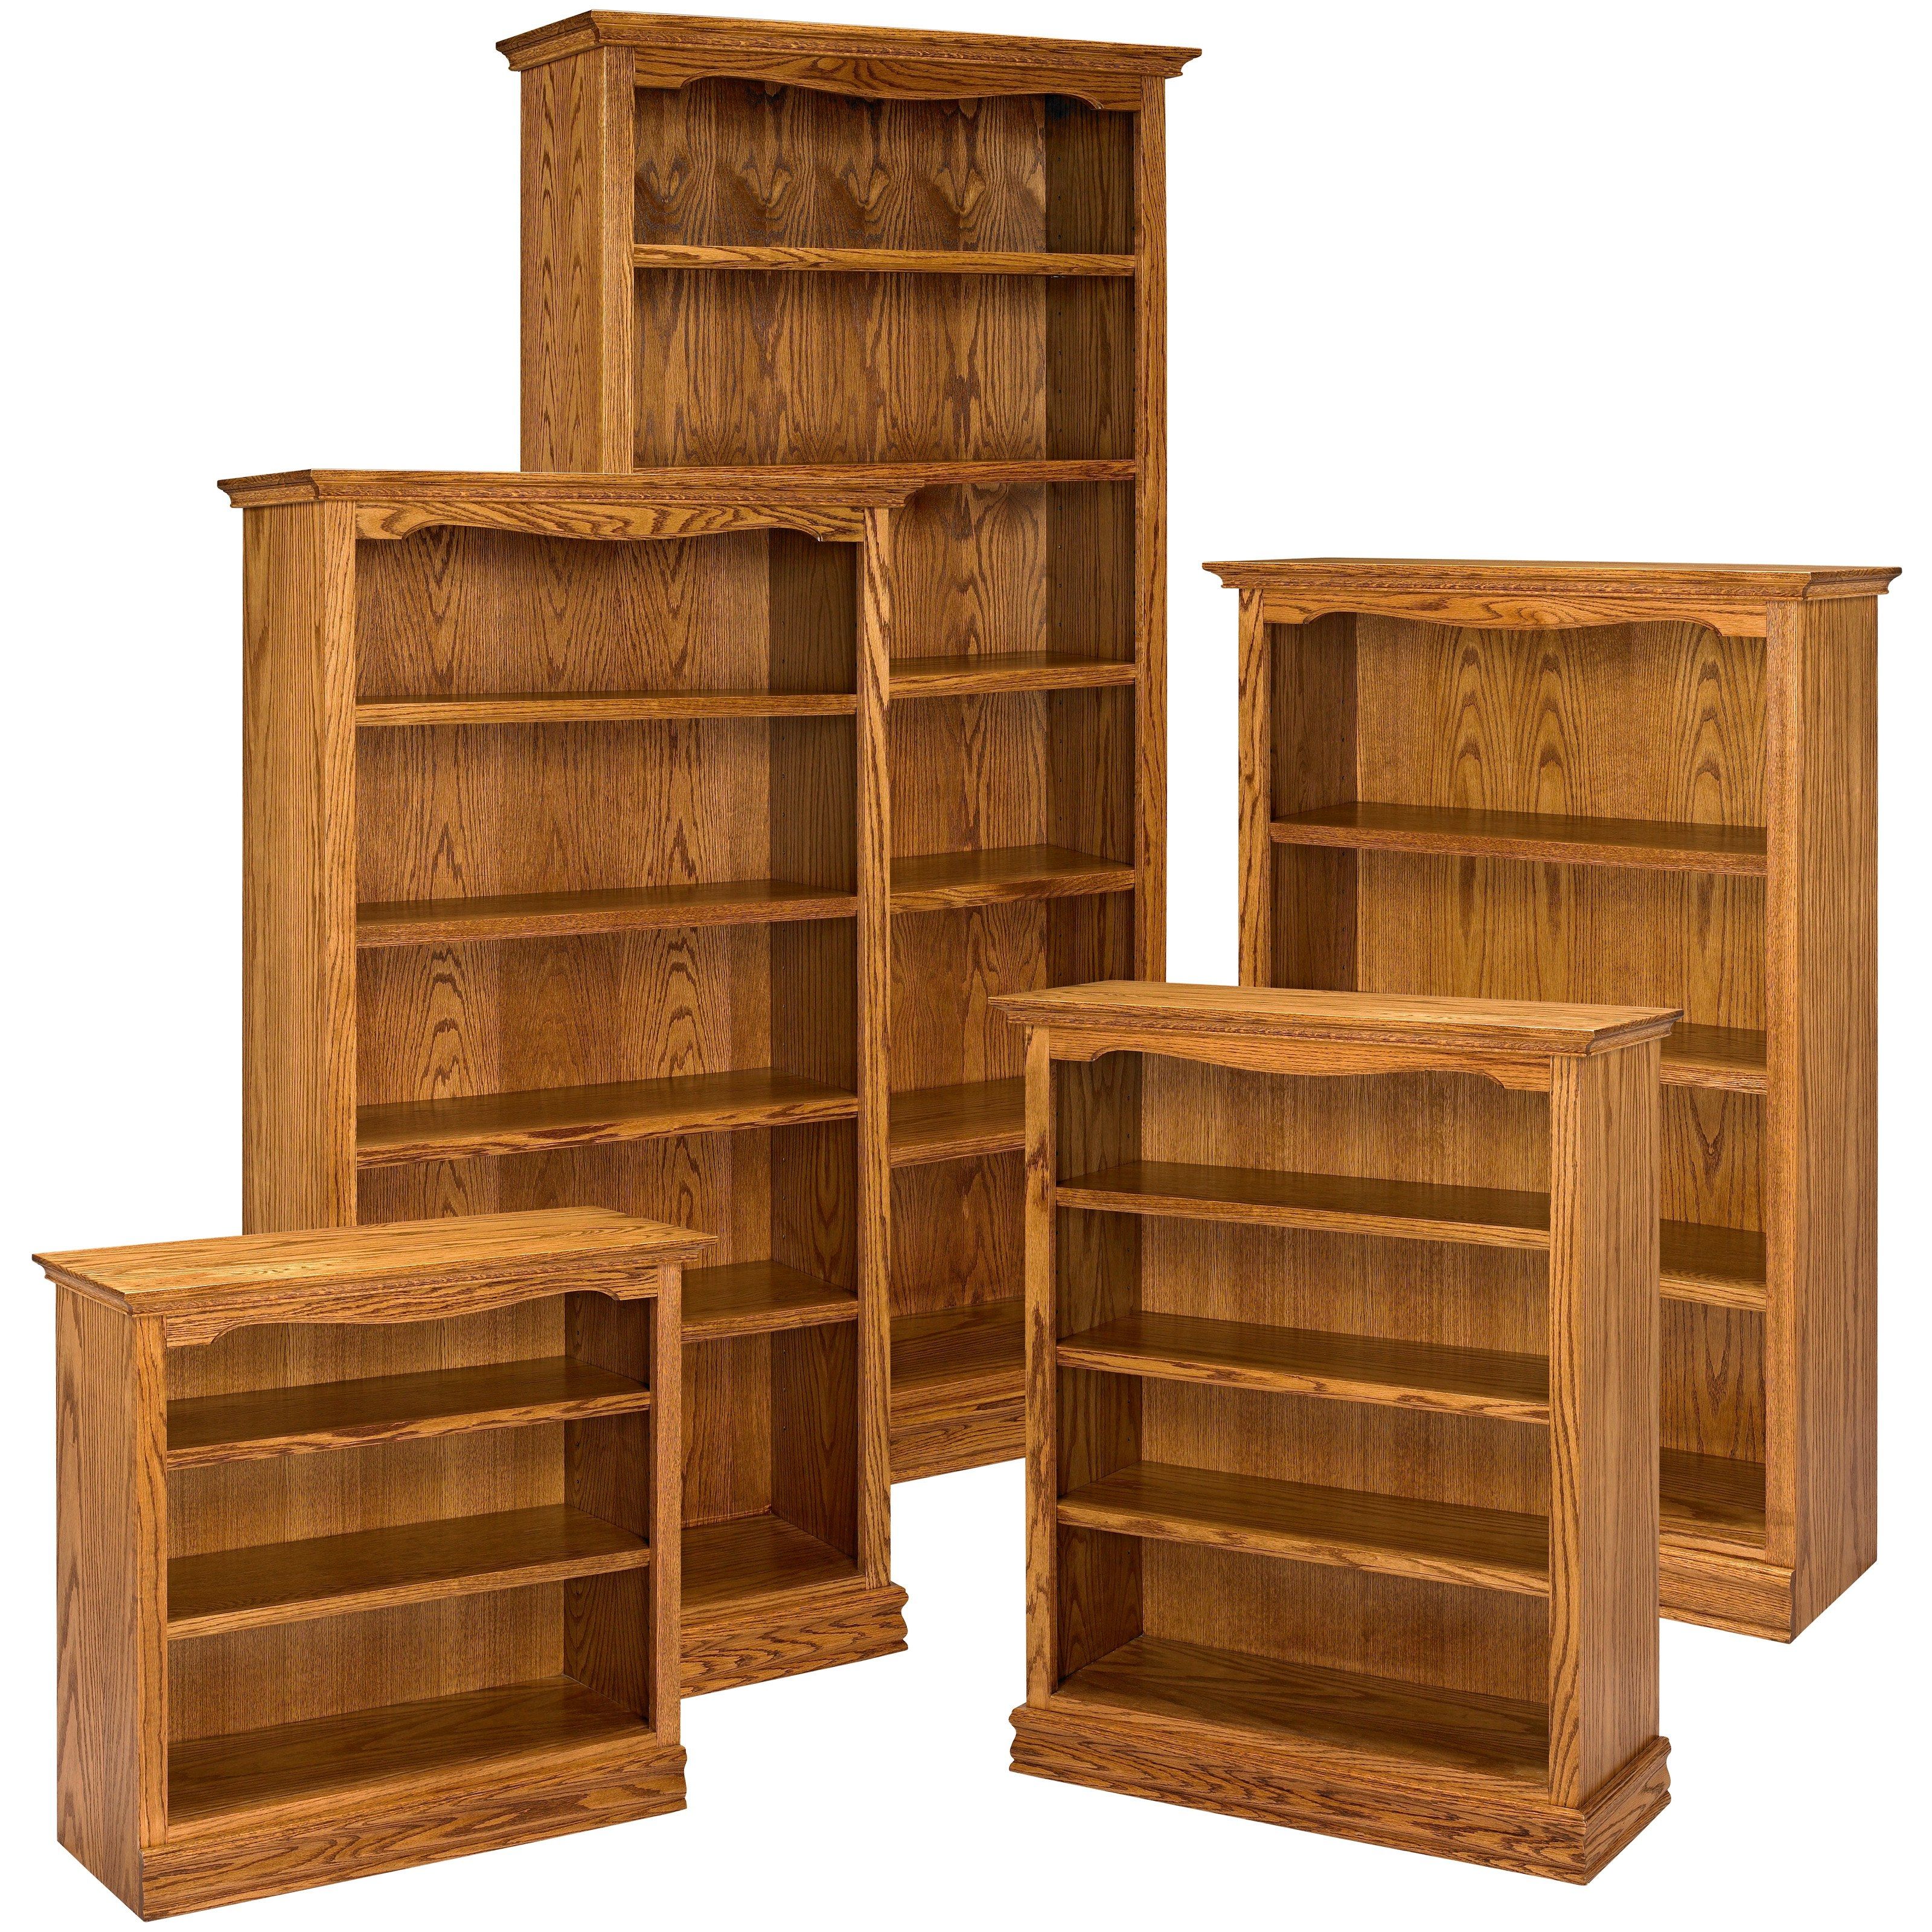 A E Solid Oak Americana Wood Bookcase Bookcases At Hayneedle Regarding Solid Oak Bookcase (View 11 of 15)